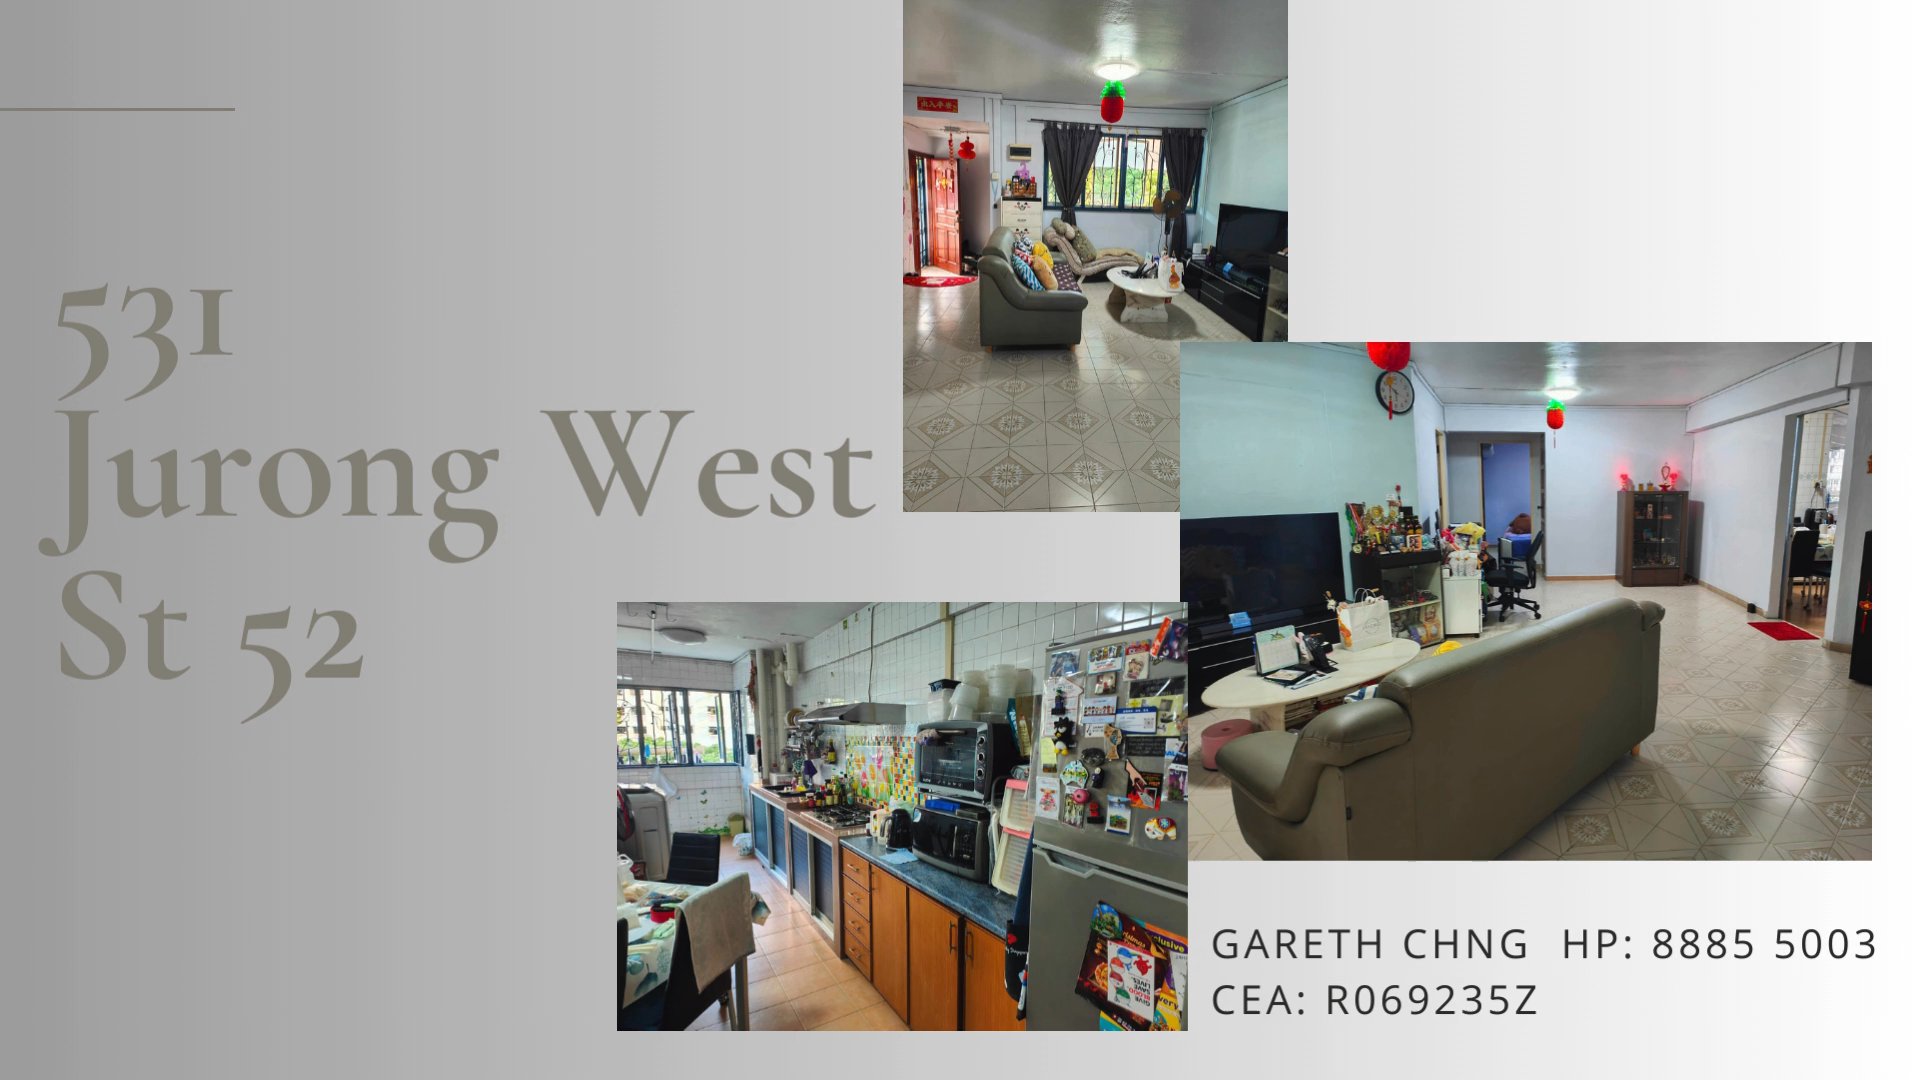 undefined of 1,065 sqft HDB for Sale in 531 Jurong West Street 52